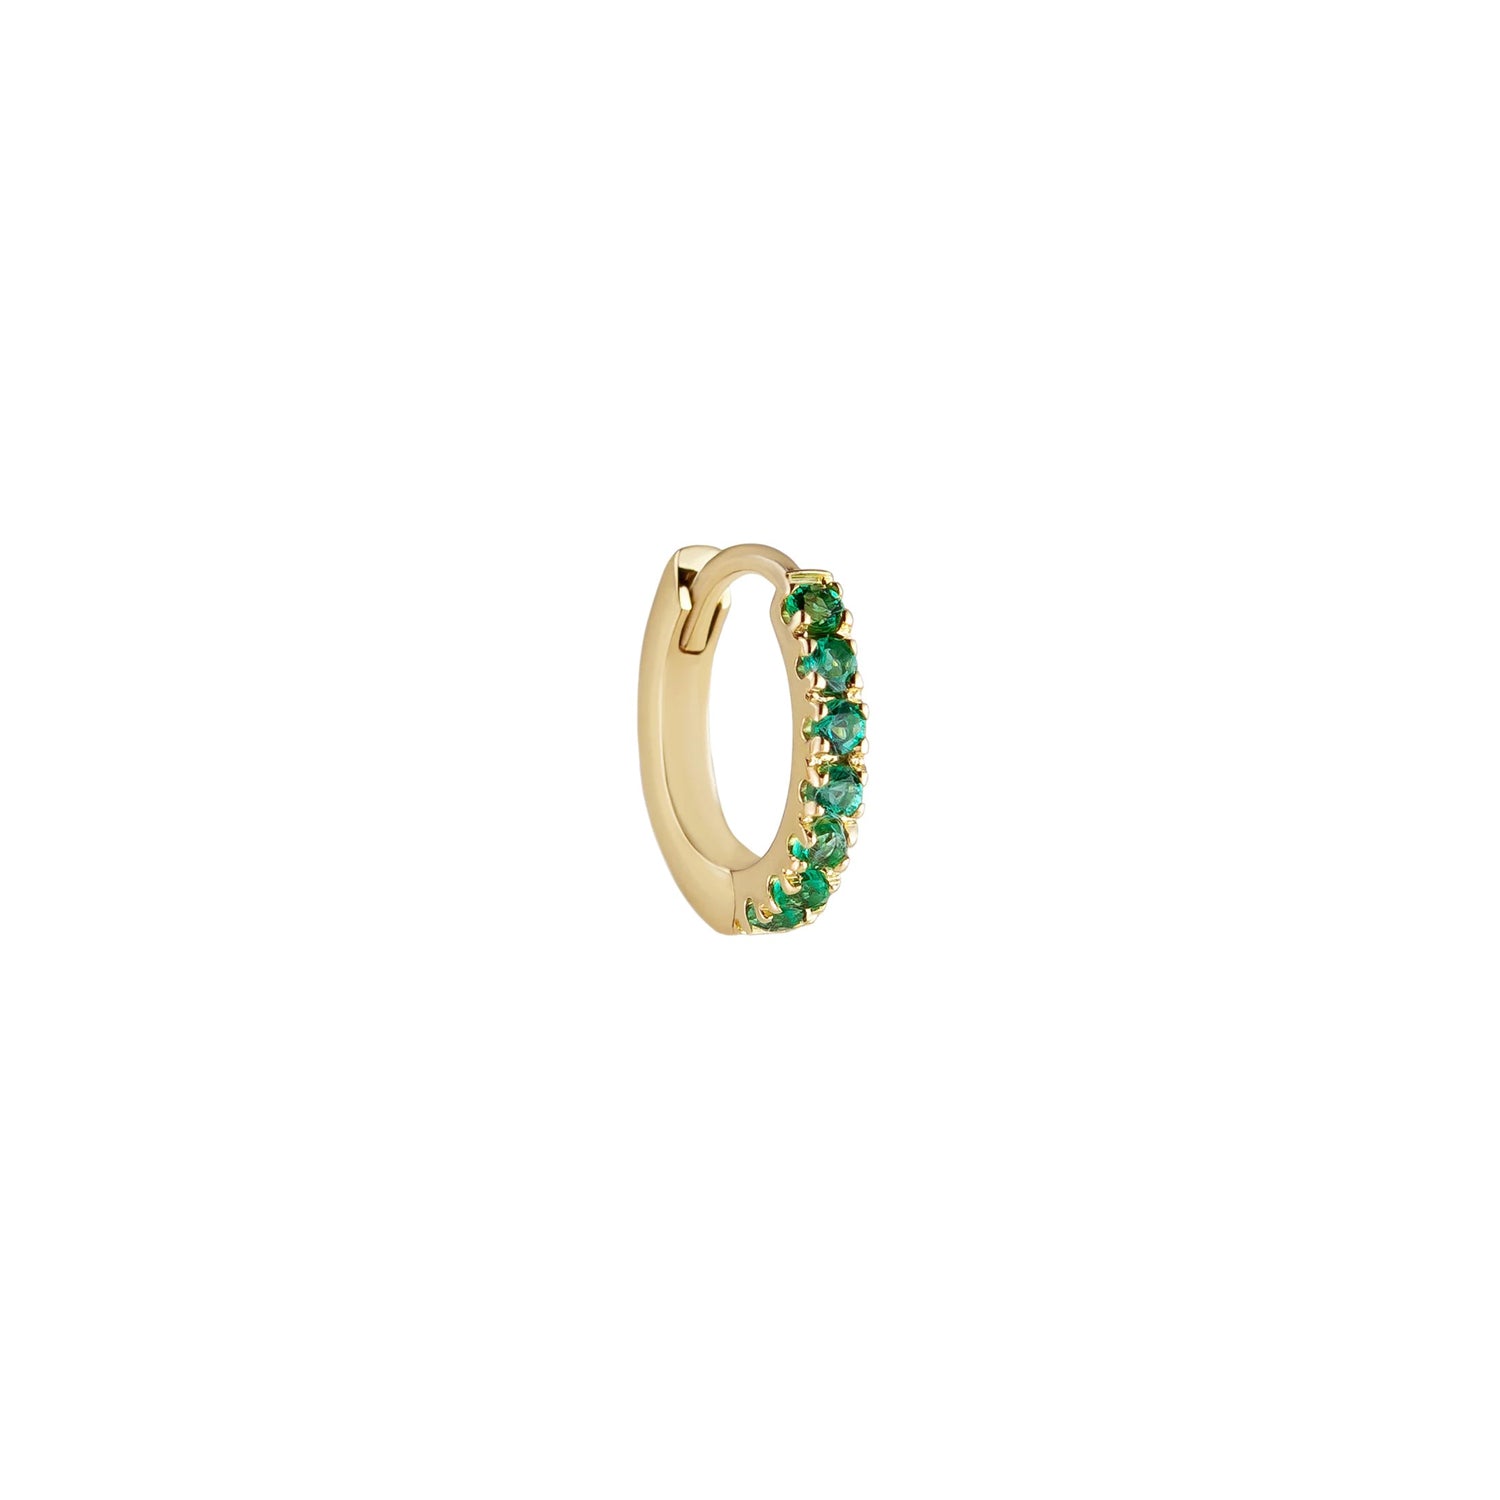 Metier by Tomfoolery 9K Gold Pave Emerald Click HoopsMetier by Tomfoolery 9K Gold Pave Emerald Click Hoops